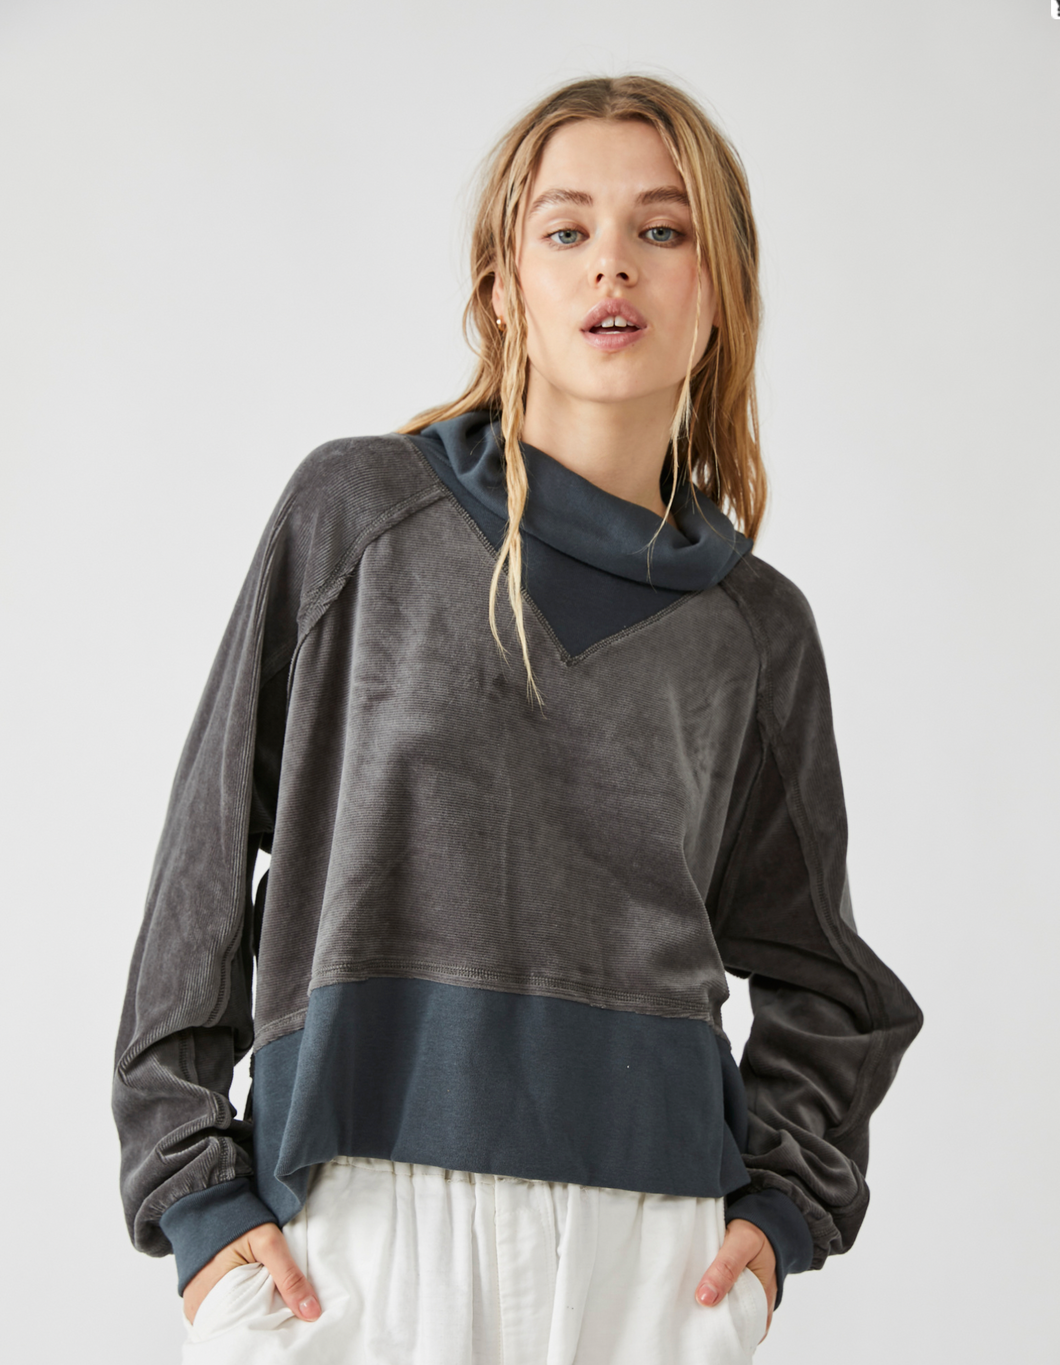 Free People - Last Chance Pullover - Charcoal